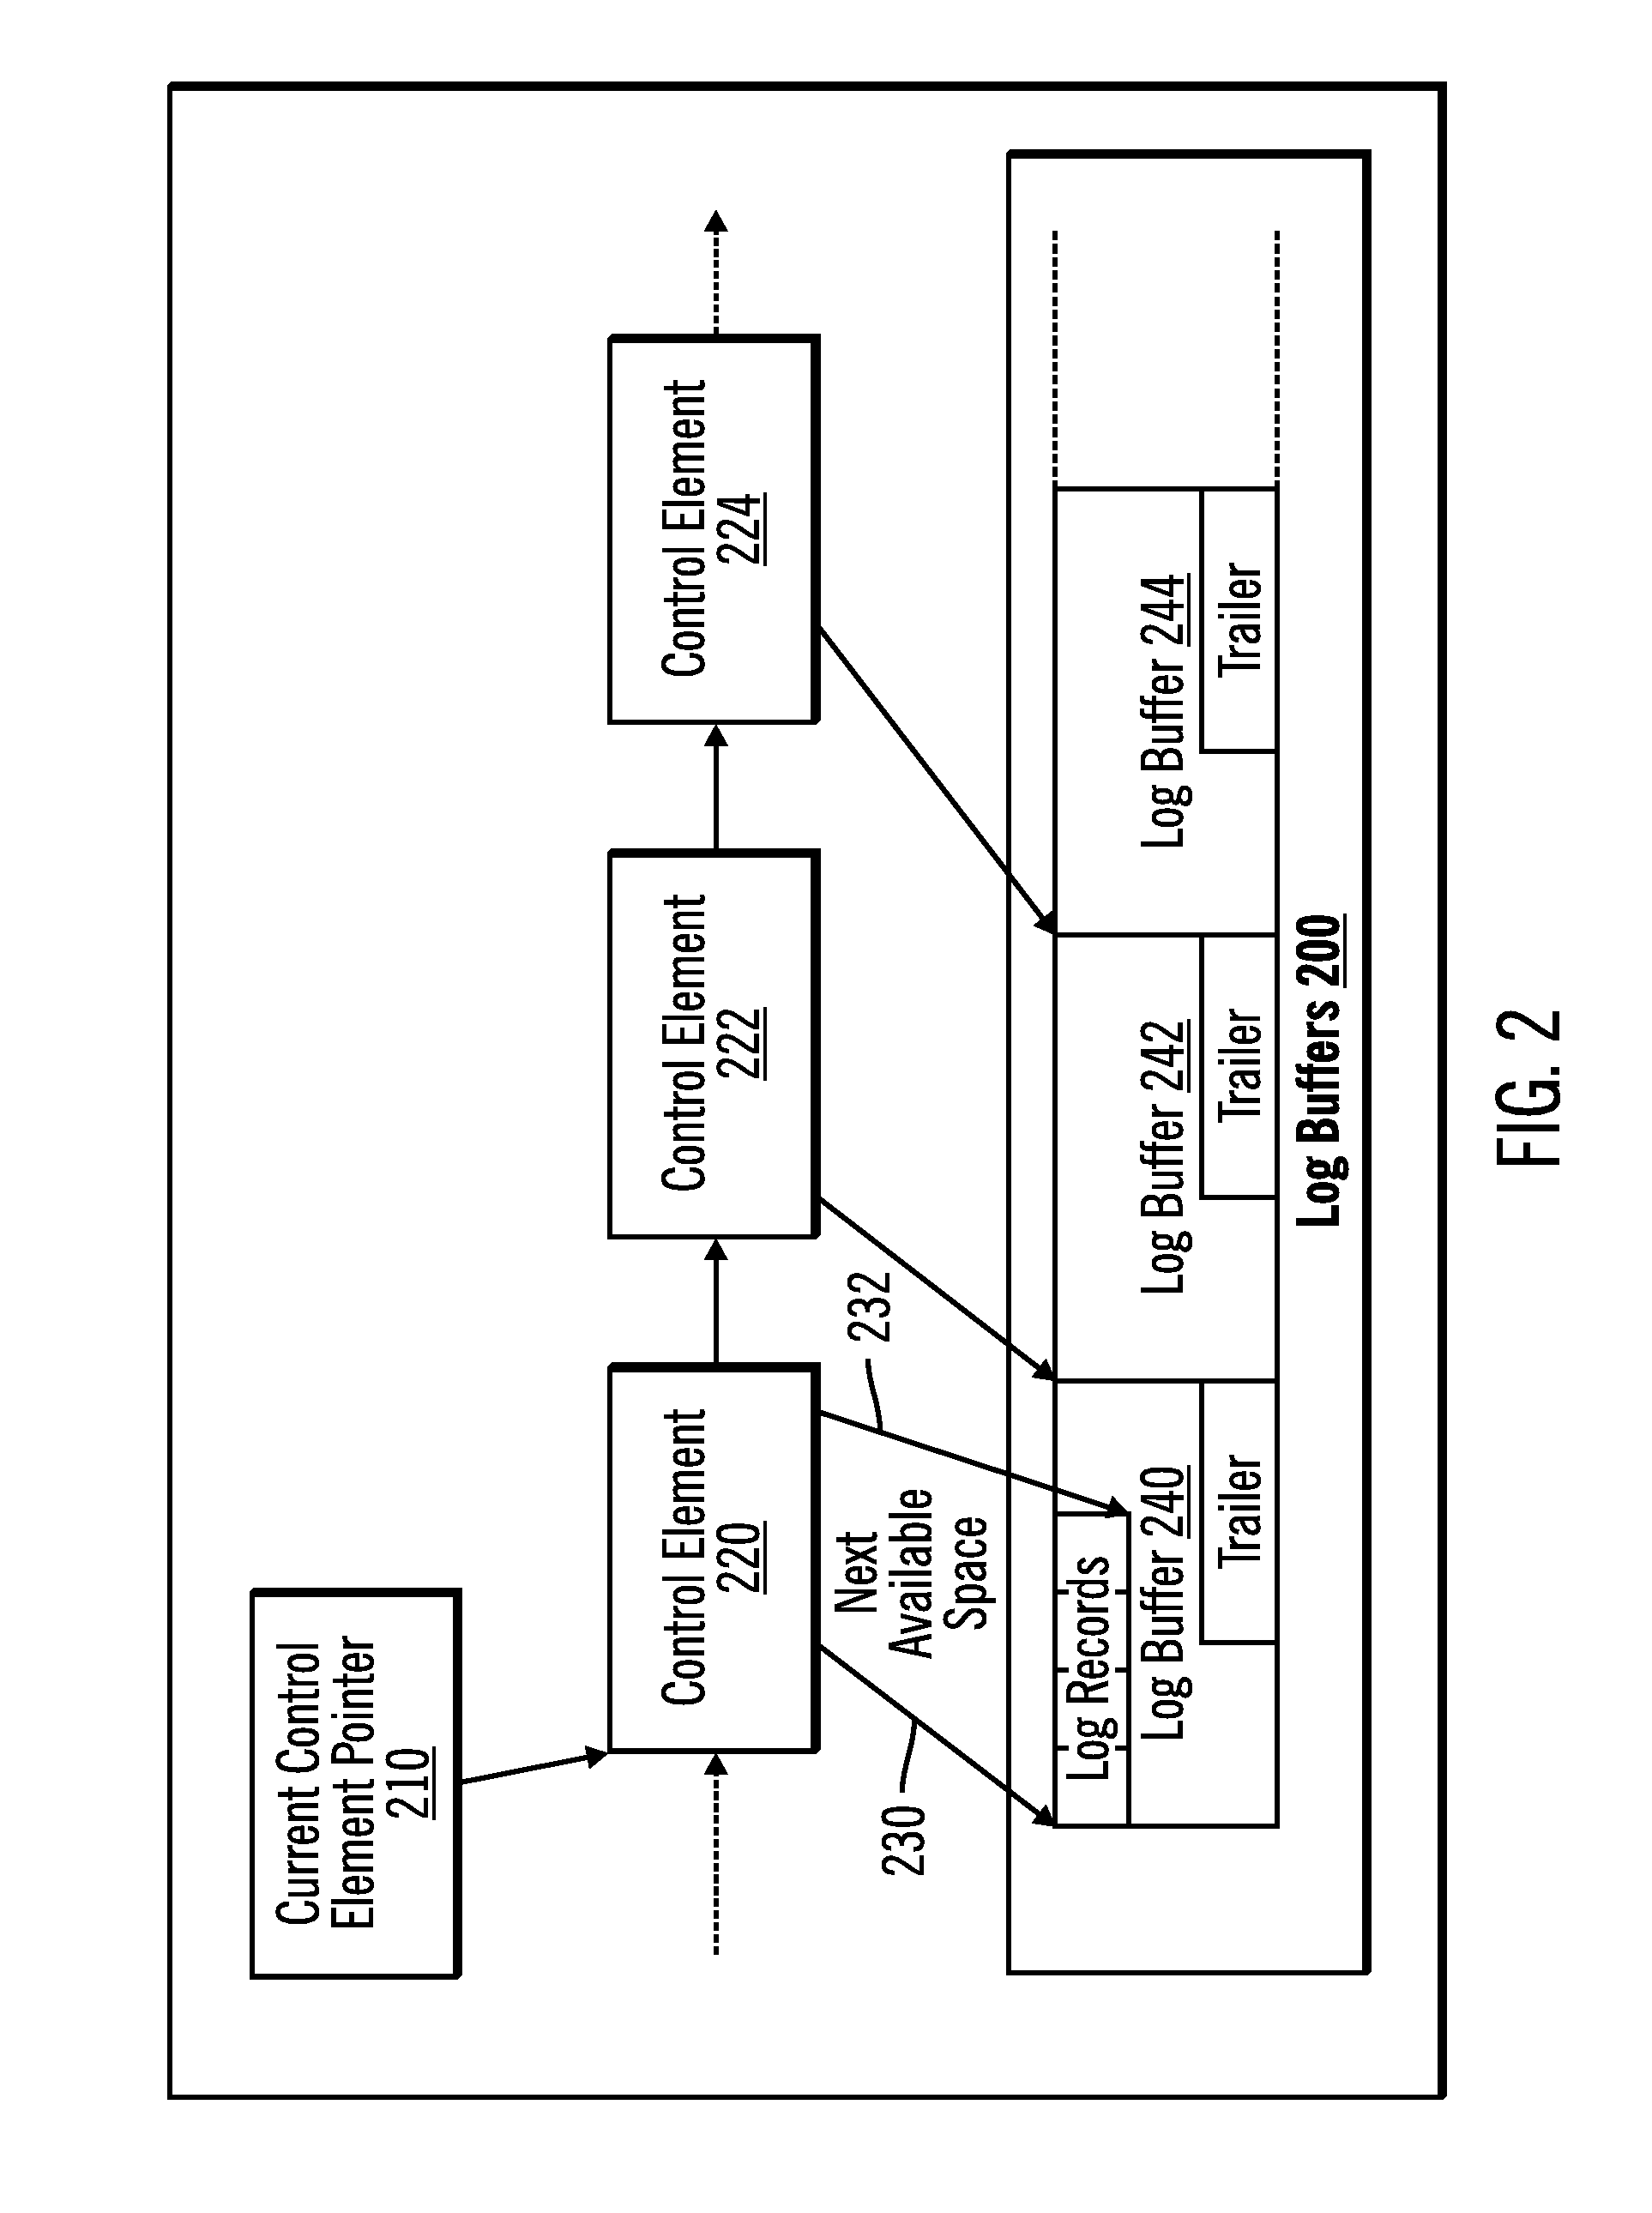 Creating and maintaining order of a log stream without use of a lock or latch